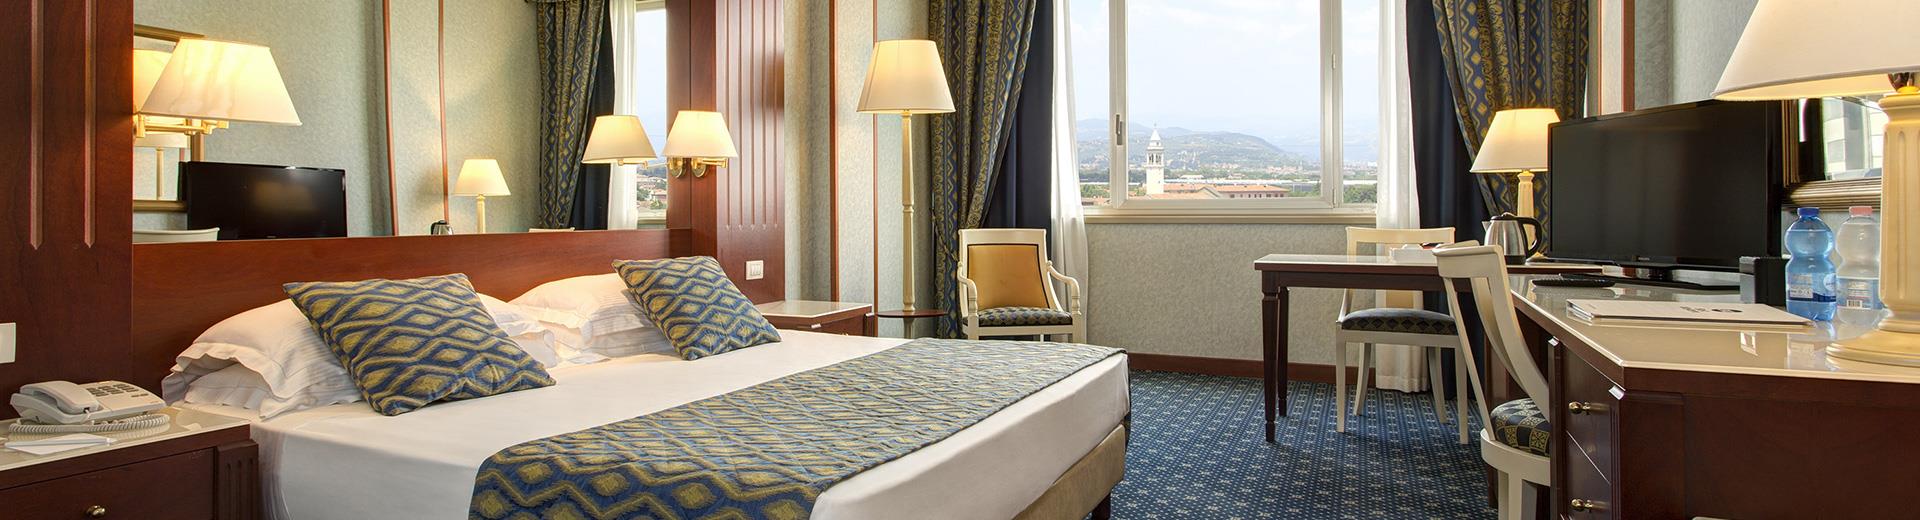  Looking for a hotel for your stay in San Giovanni Lupatoto (VR)? Book/reserve at the Best Western CTC Hotel Verona